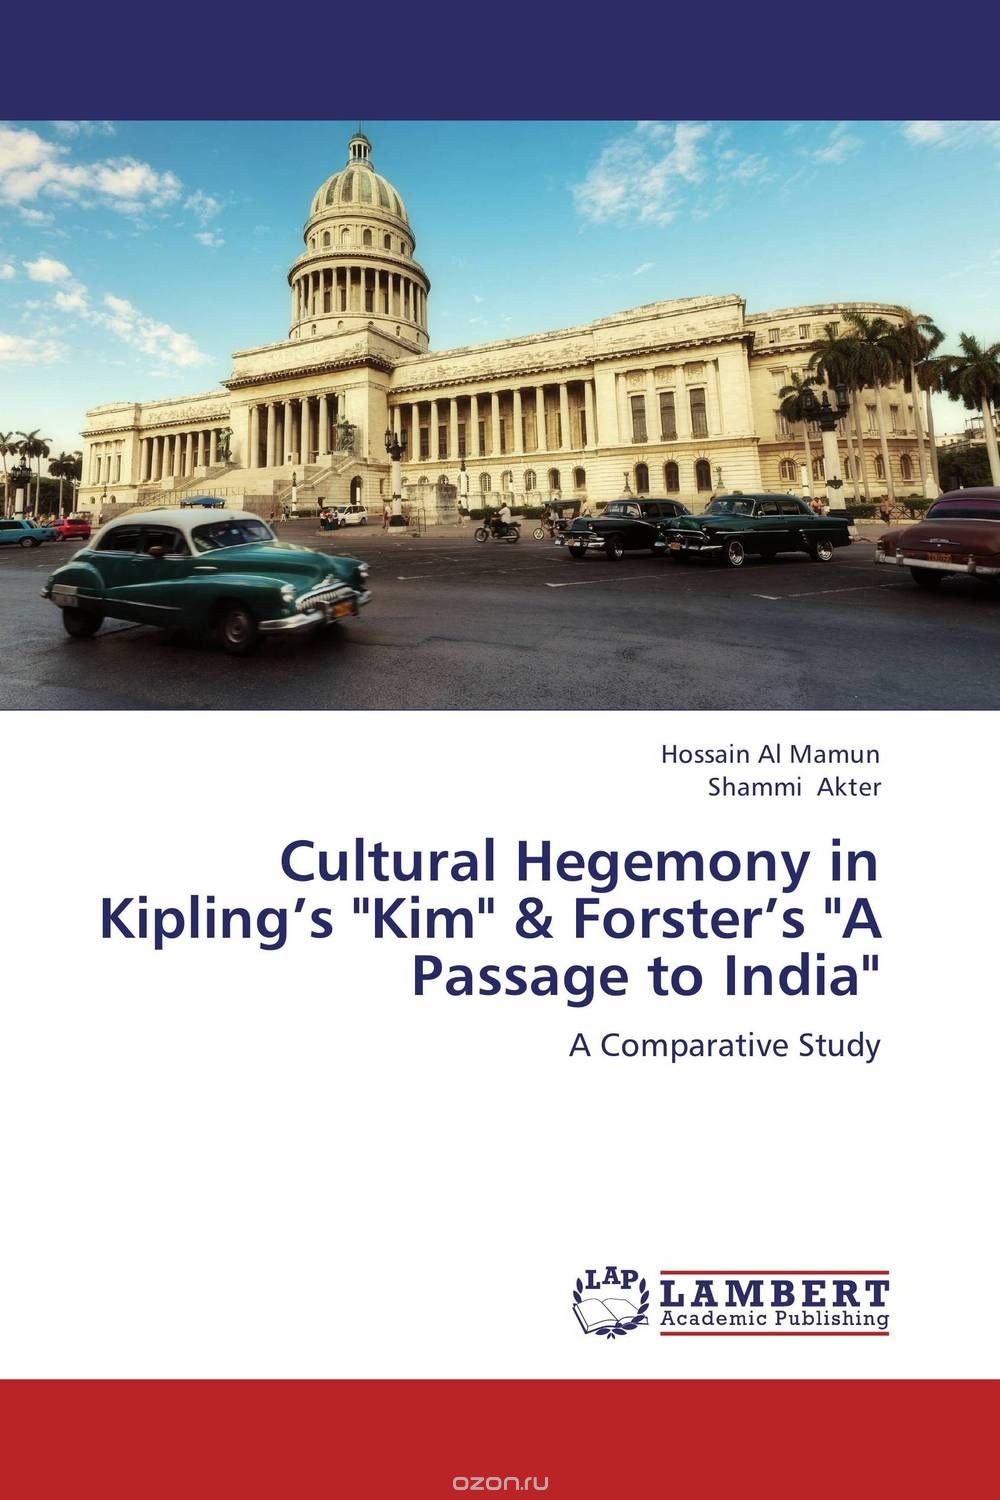 Скачать книгу "Cultural Hegemony in Kipling’s "Kim" & Forster’s "A Passage to India""